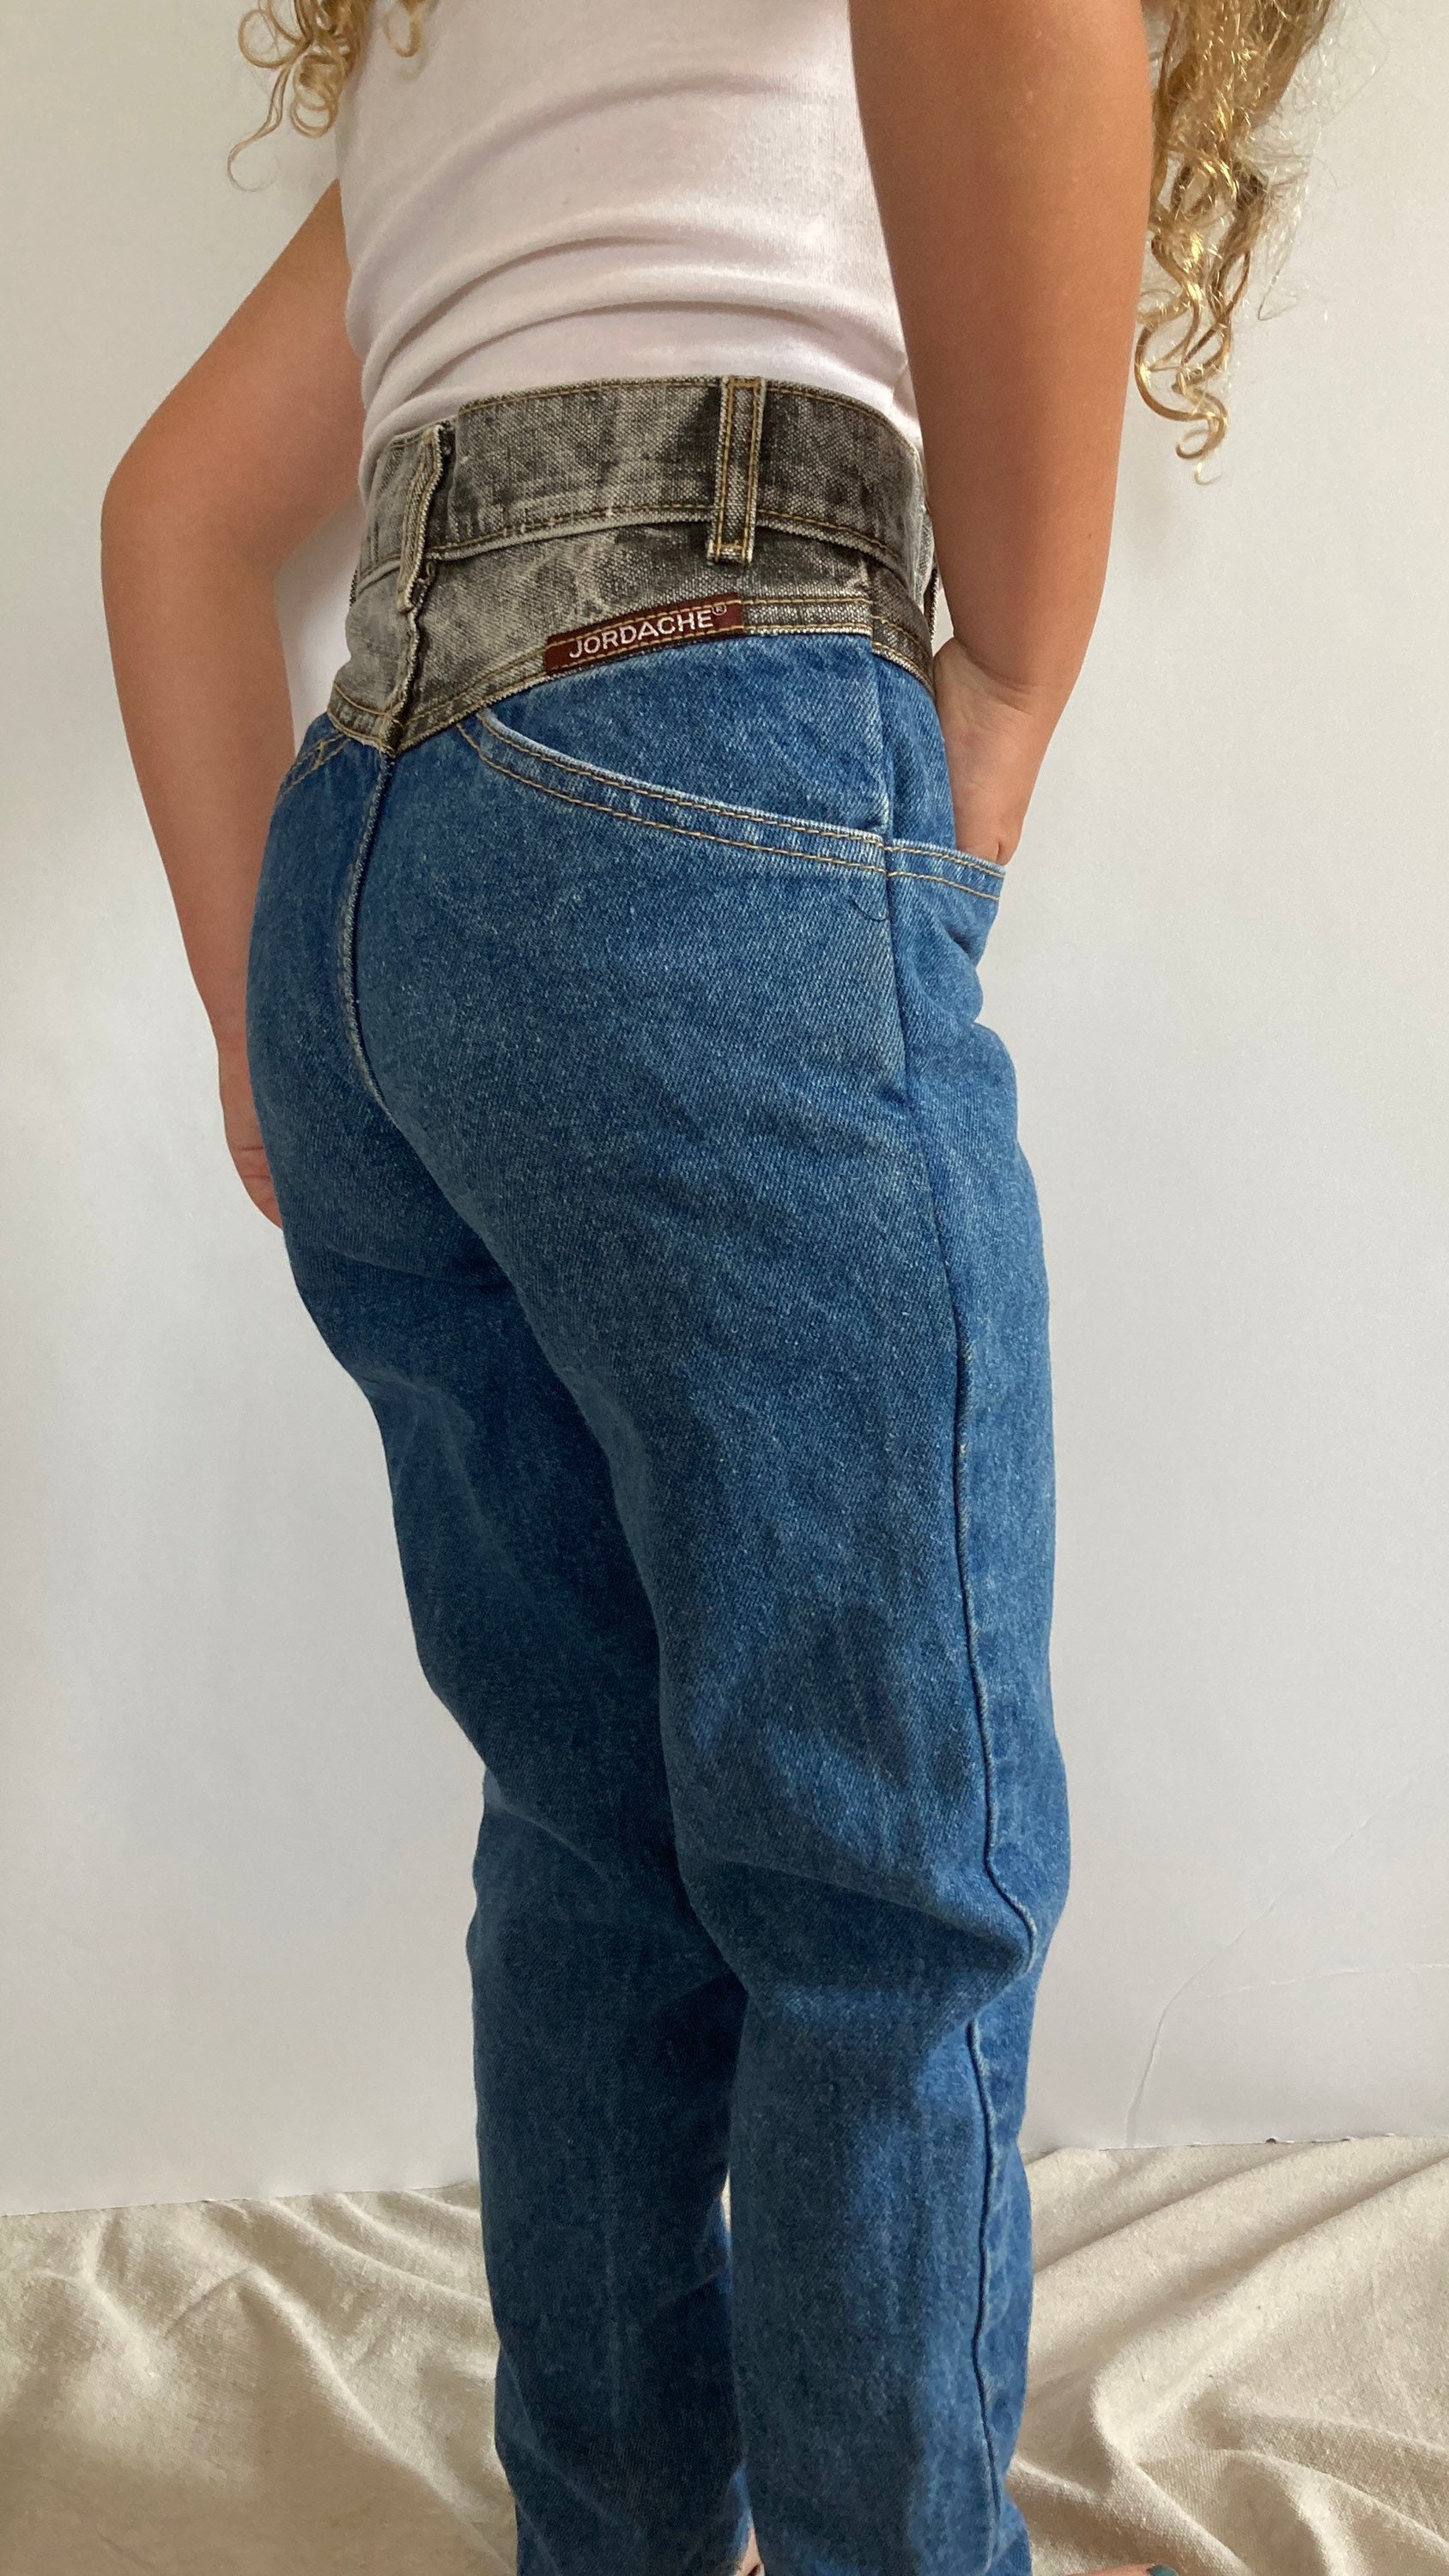 Buy 1980s, 1990s, Vintage Jordache Jeans, Two Tone Denim, High Rise Jeans,  Tapered, High Waisted, Rare Retro Kids Jeans, 5T, 6, Usa Made, 20 Online in  India 